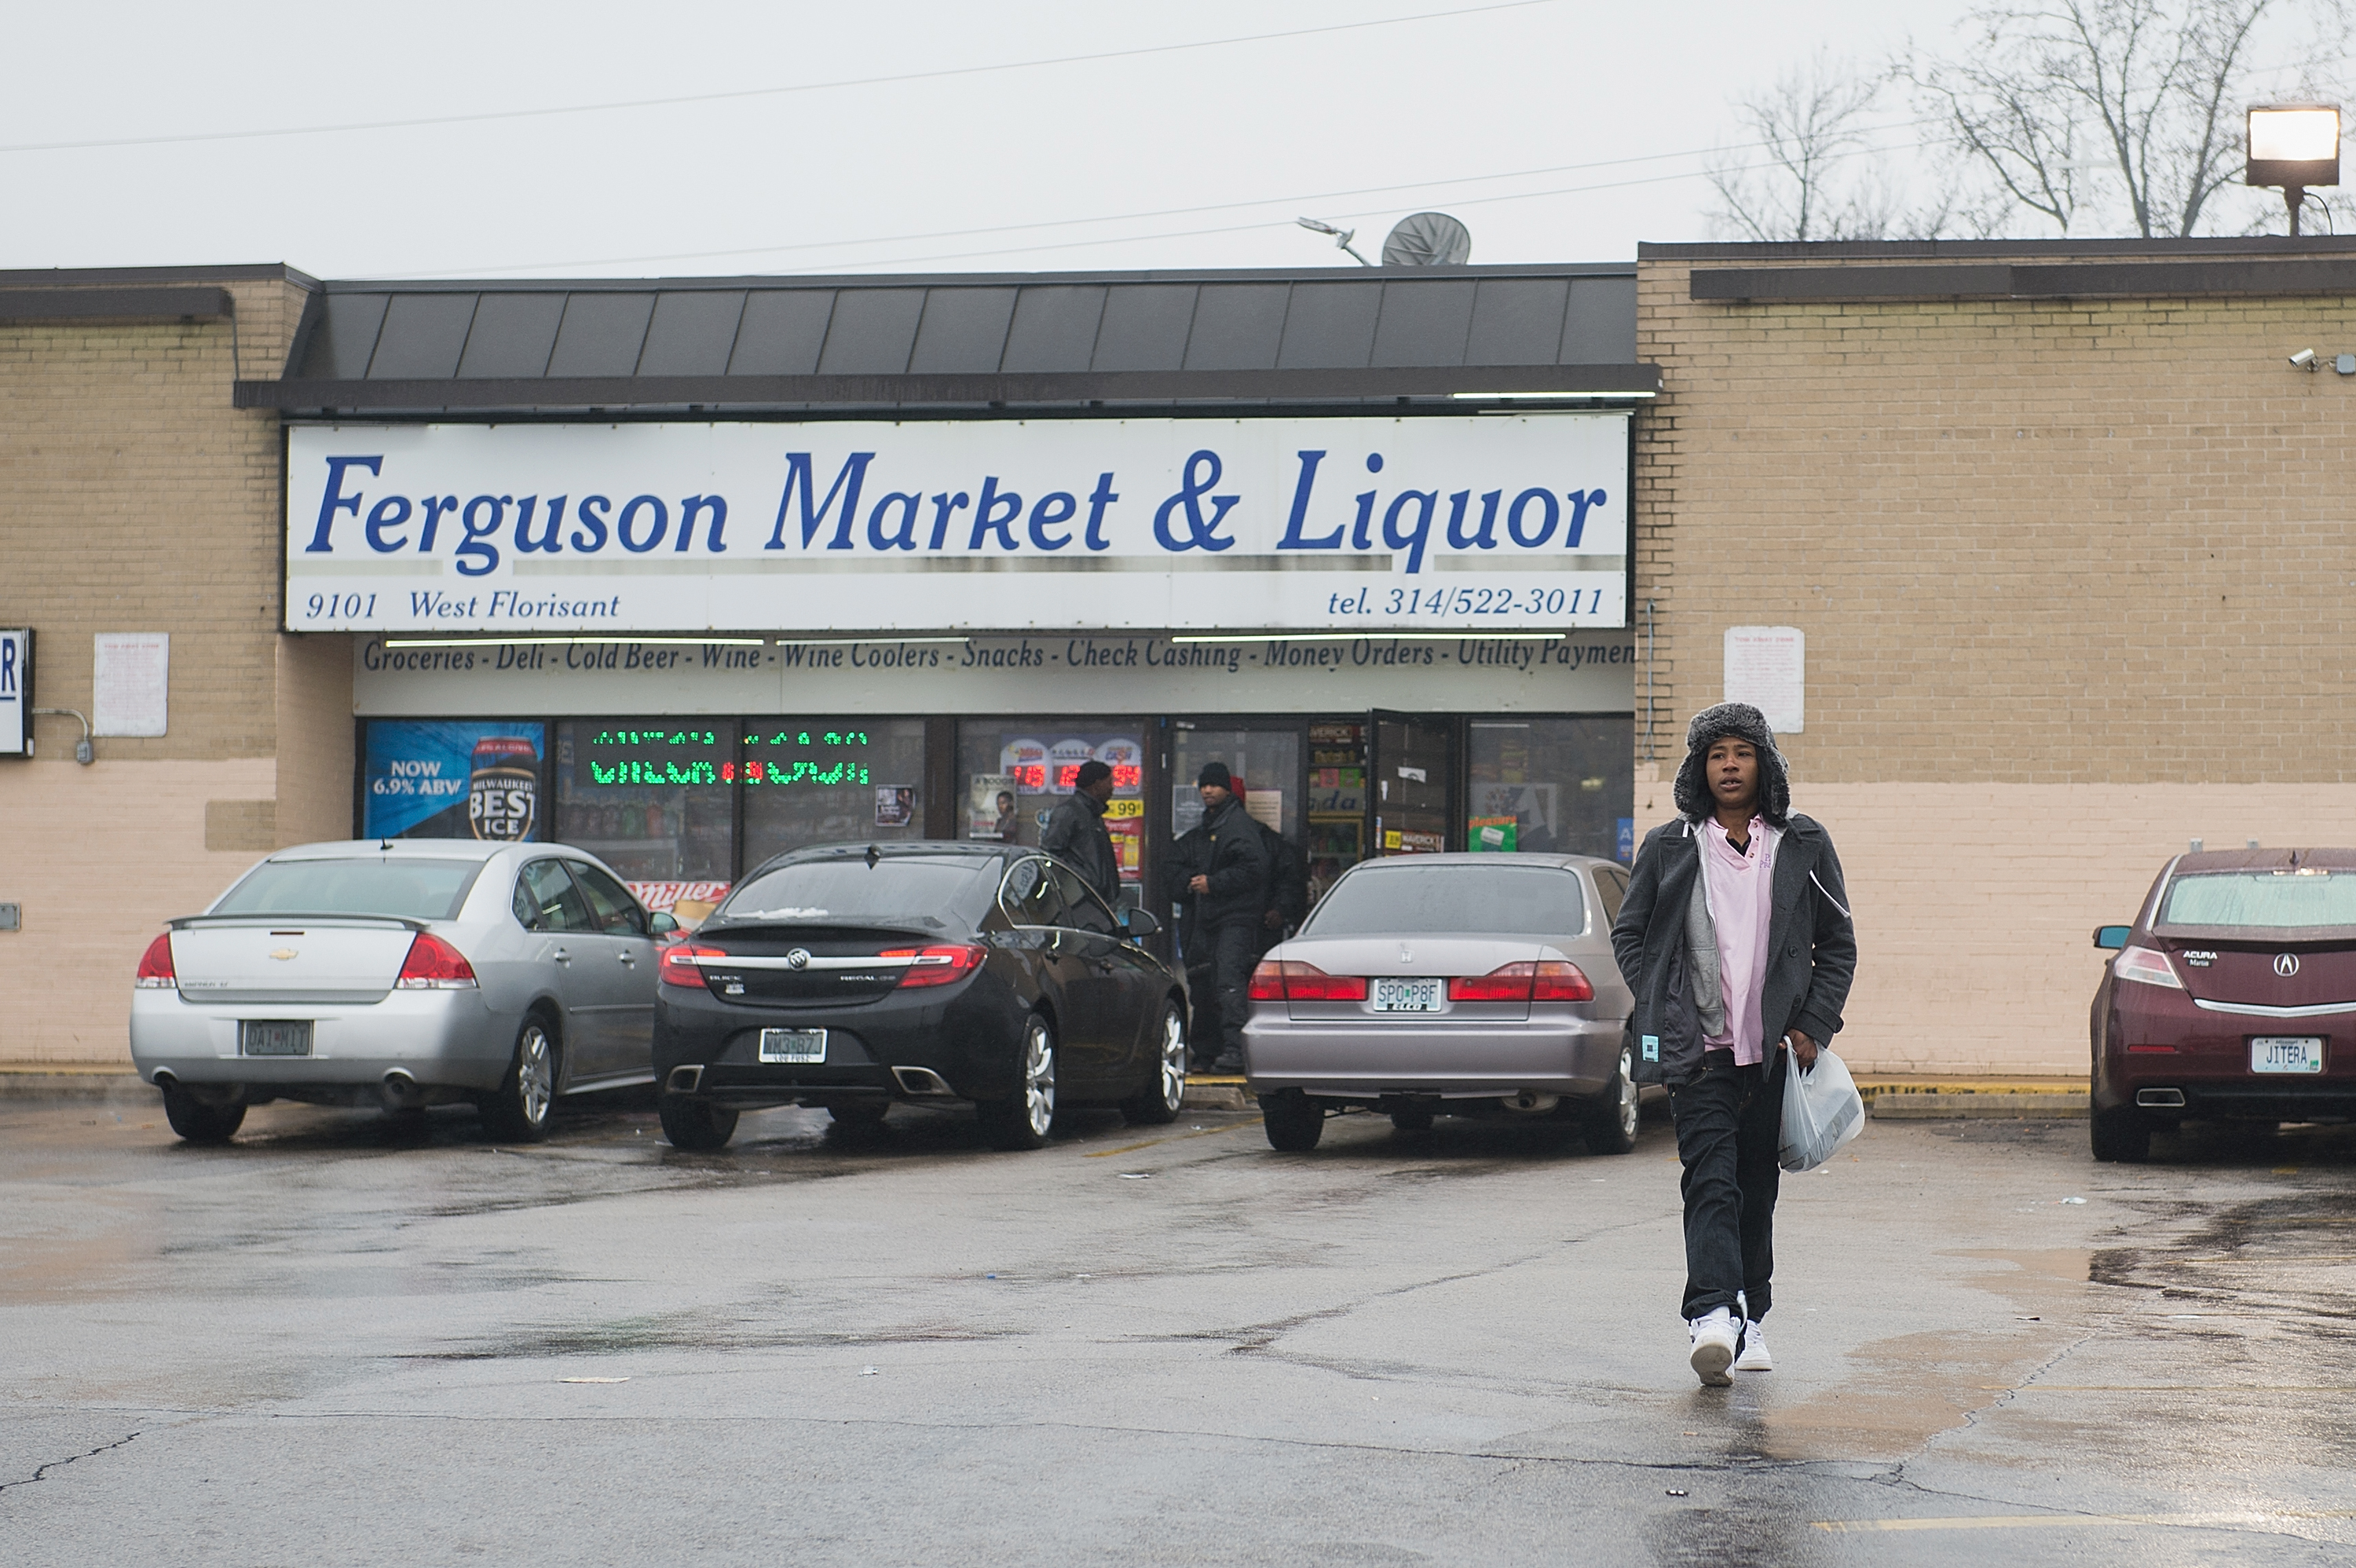 A woman walks outside the Ferguson Market and Liquor on March 13, 2017 in Ferguson, Missouri as tensions visit the city following video footage of slain 18 year-old Michael Brown in a recent documentary. (Michael B. Thomas&mdash;Getty Images)